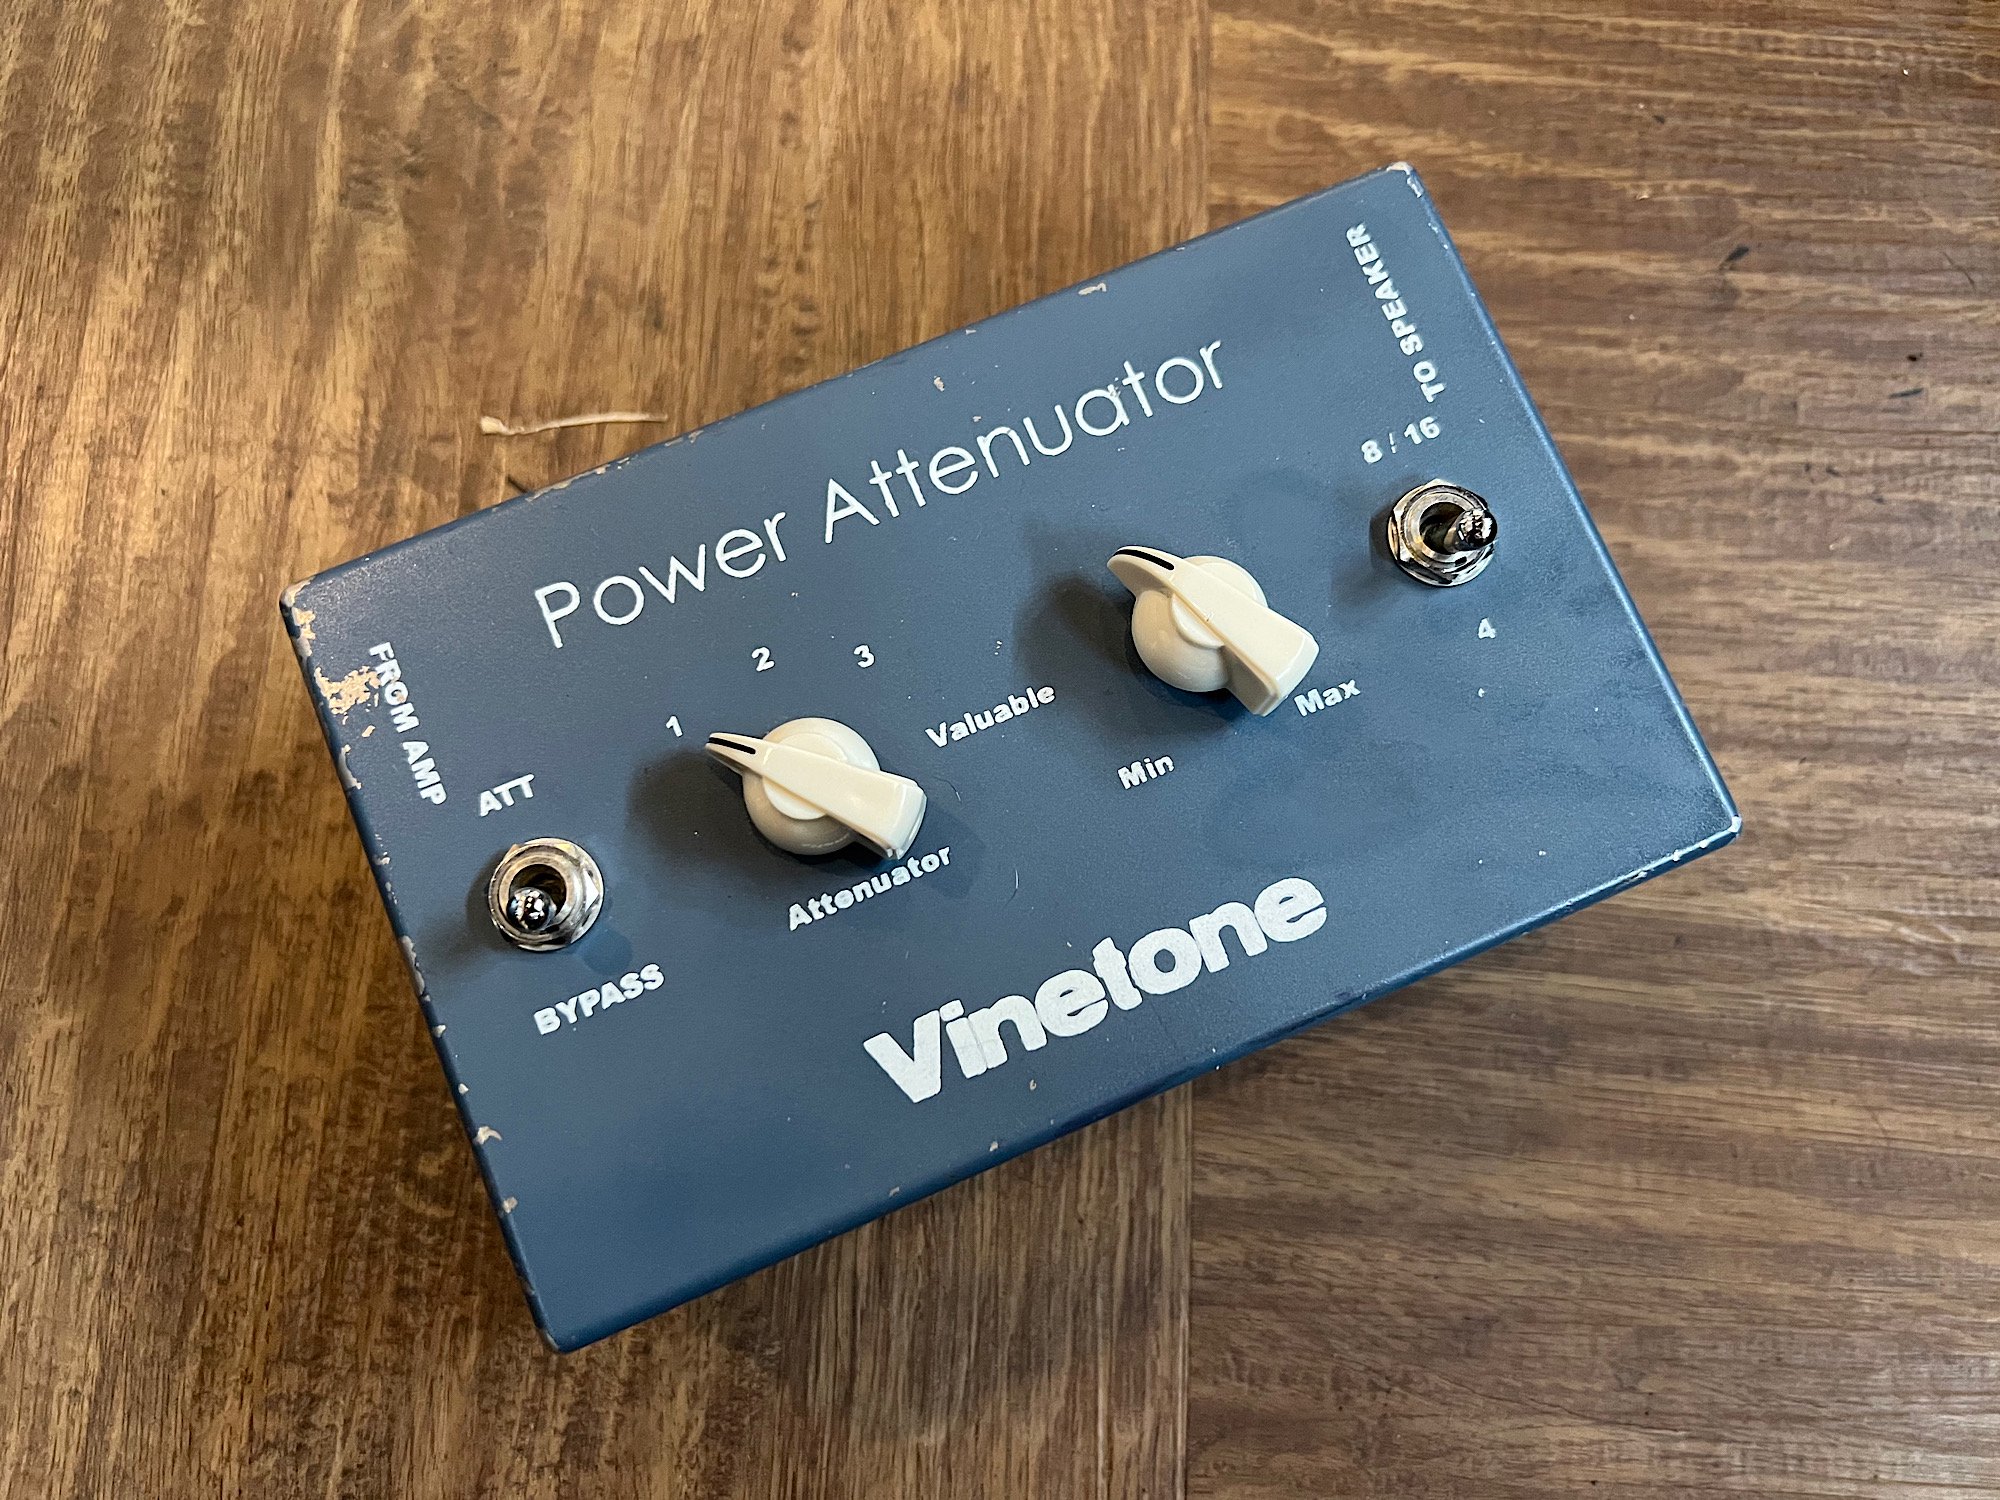 VINETONE POWER ATTENUATOR 2OUT 2OUT仕様に改造された人気の 